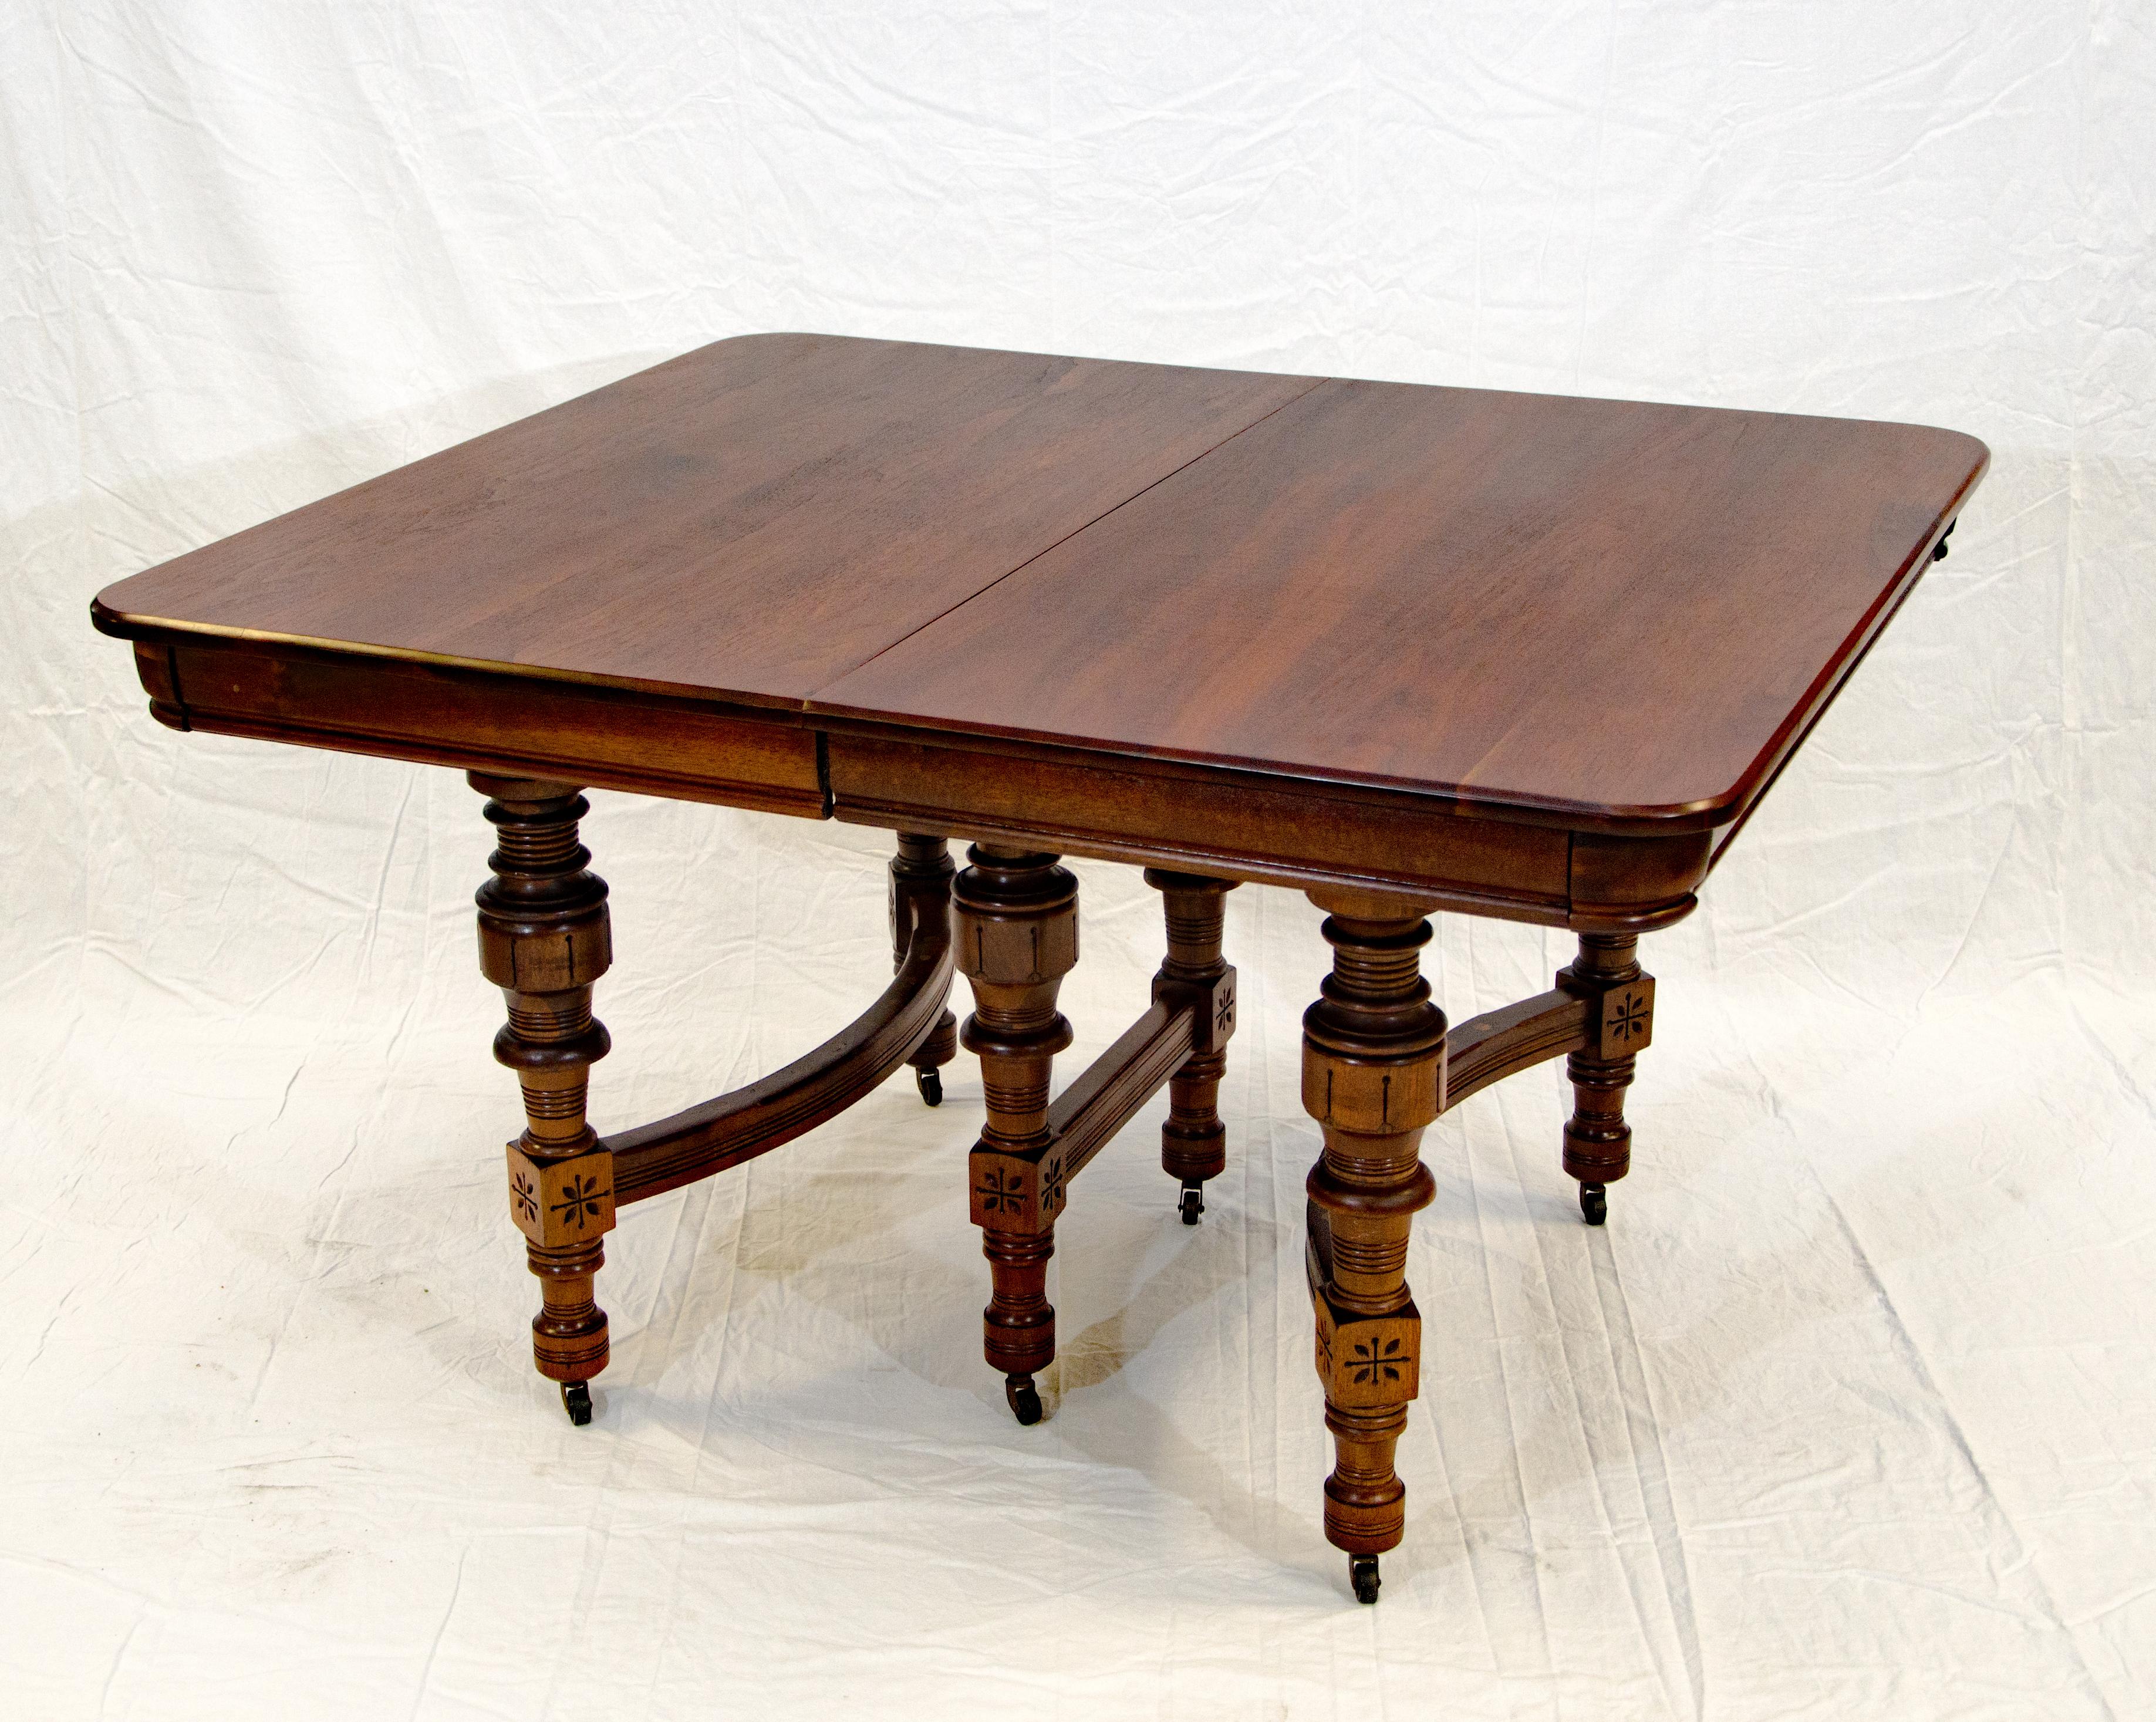 Very nice medium sized Eastlake Victorian walnut dining table with two leaves that measure 11 1/4